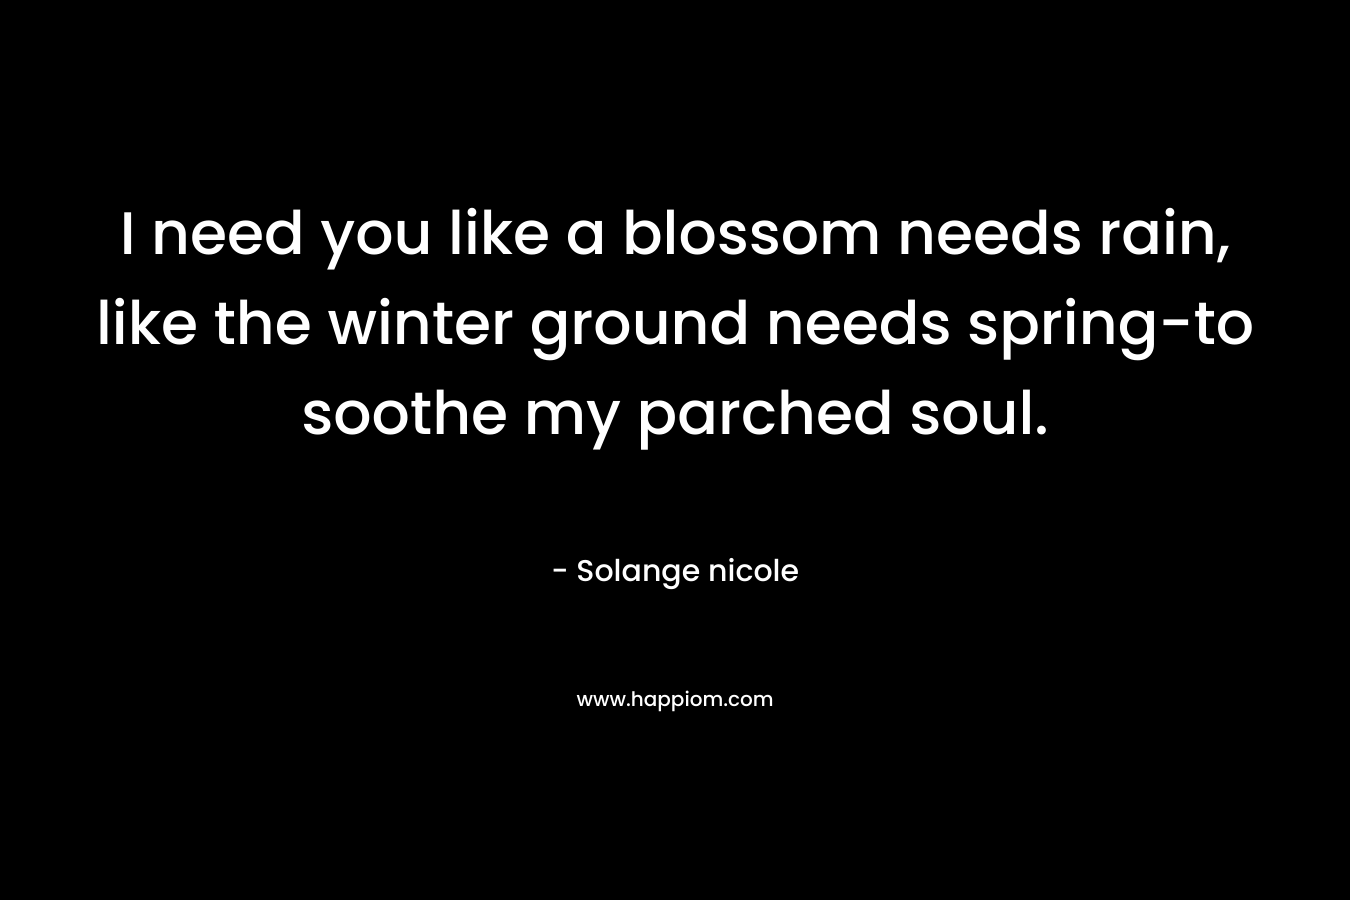 I need you like a blossom needs rain, like the winter ground needs spring-to soothe my parched soul. – Solange nicole